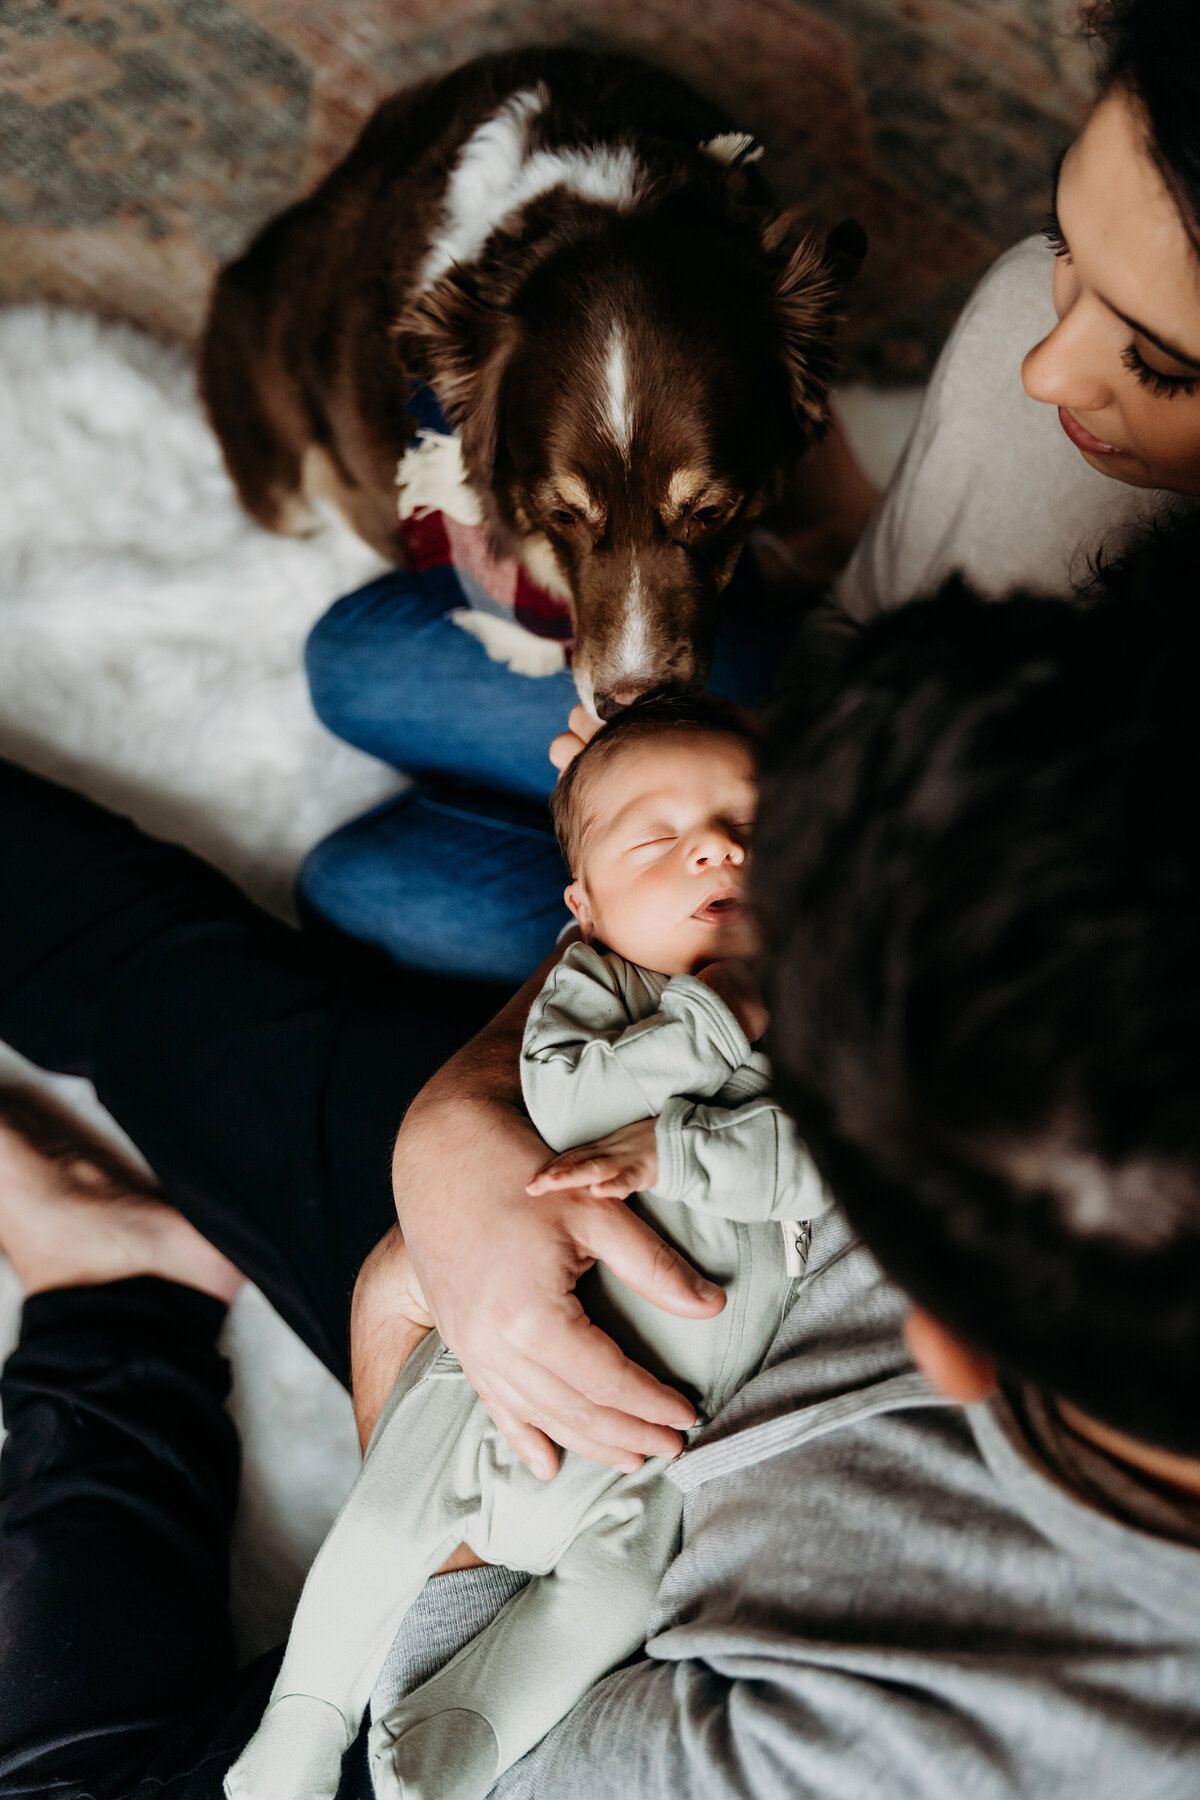 Newborn Photography, a dad holds his newborn baby, a dog investigates baby too